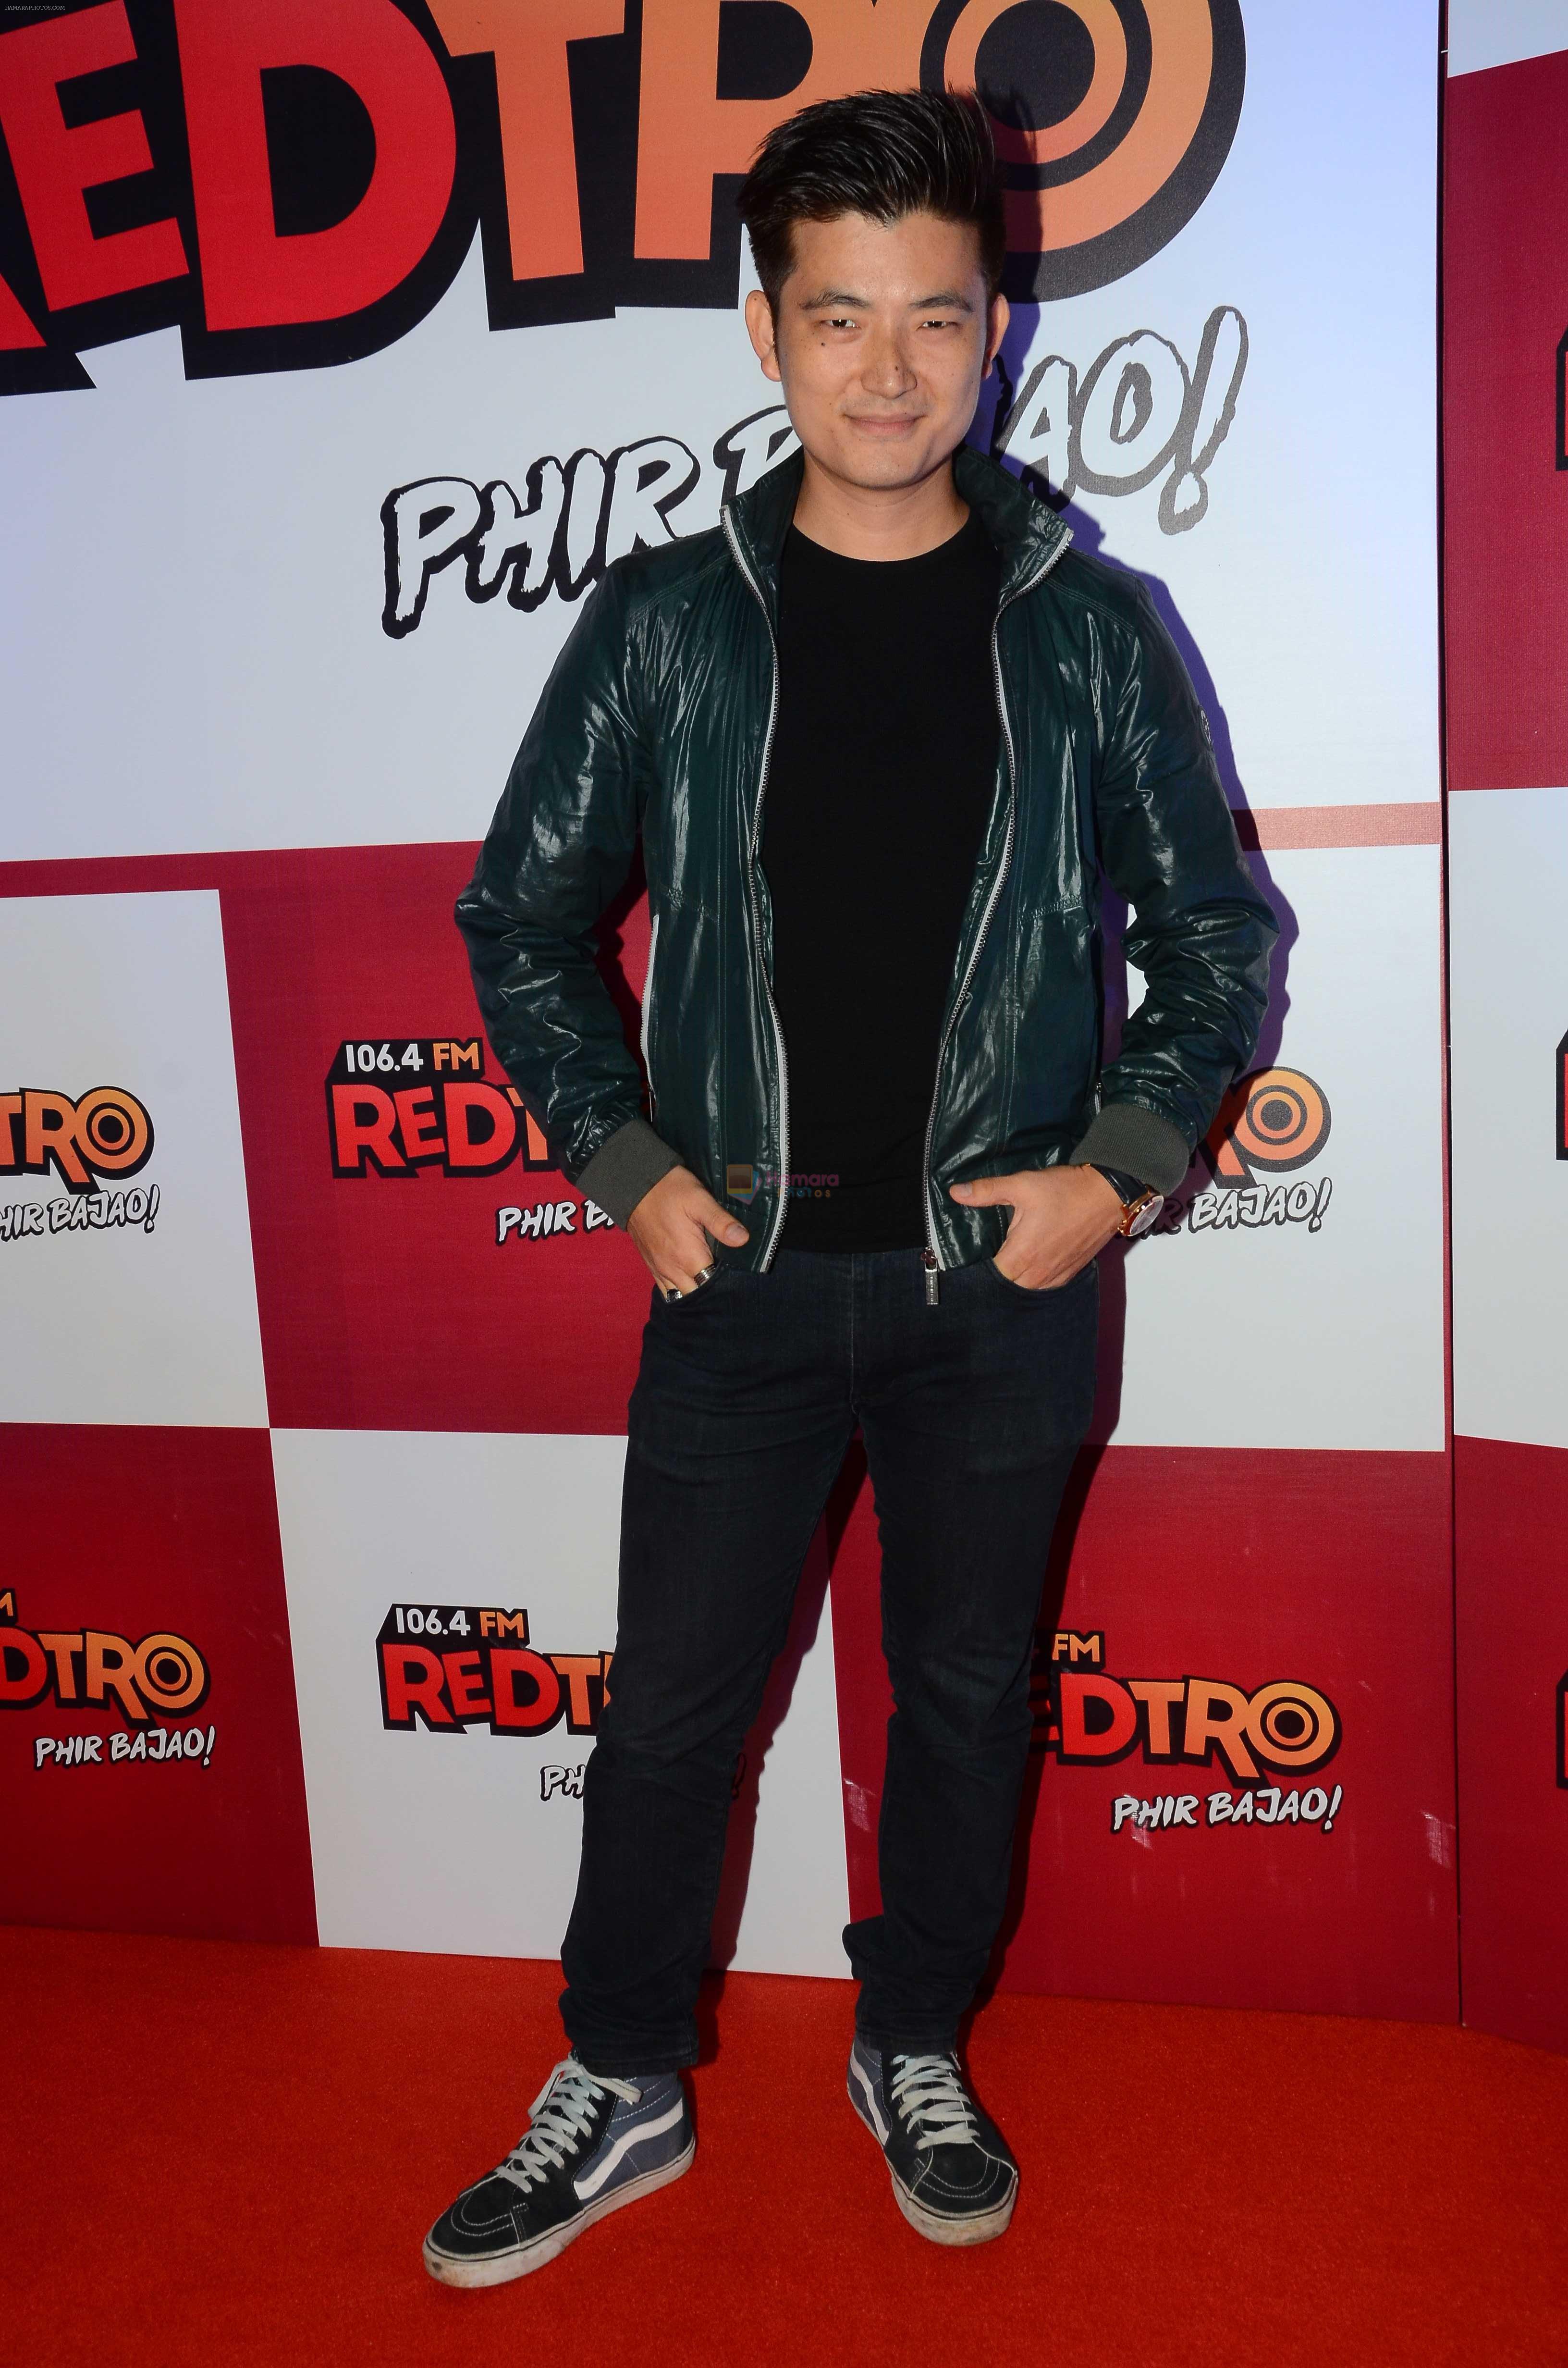 Meiyang Chang during the party organised by Red FM to celebrate the launch of its new radio station Redtro 106.4 in Mumbai India on 22 July 2016